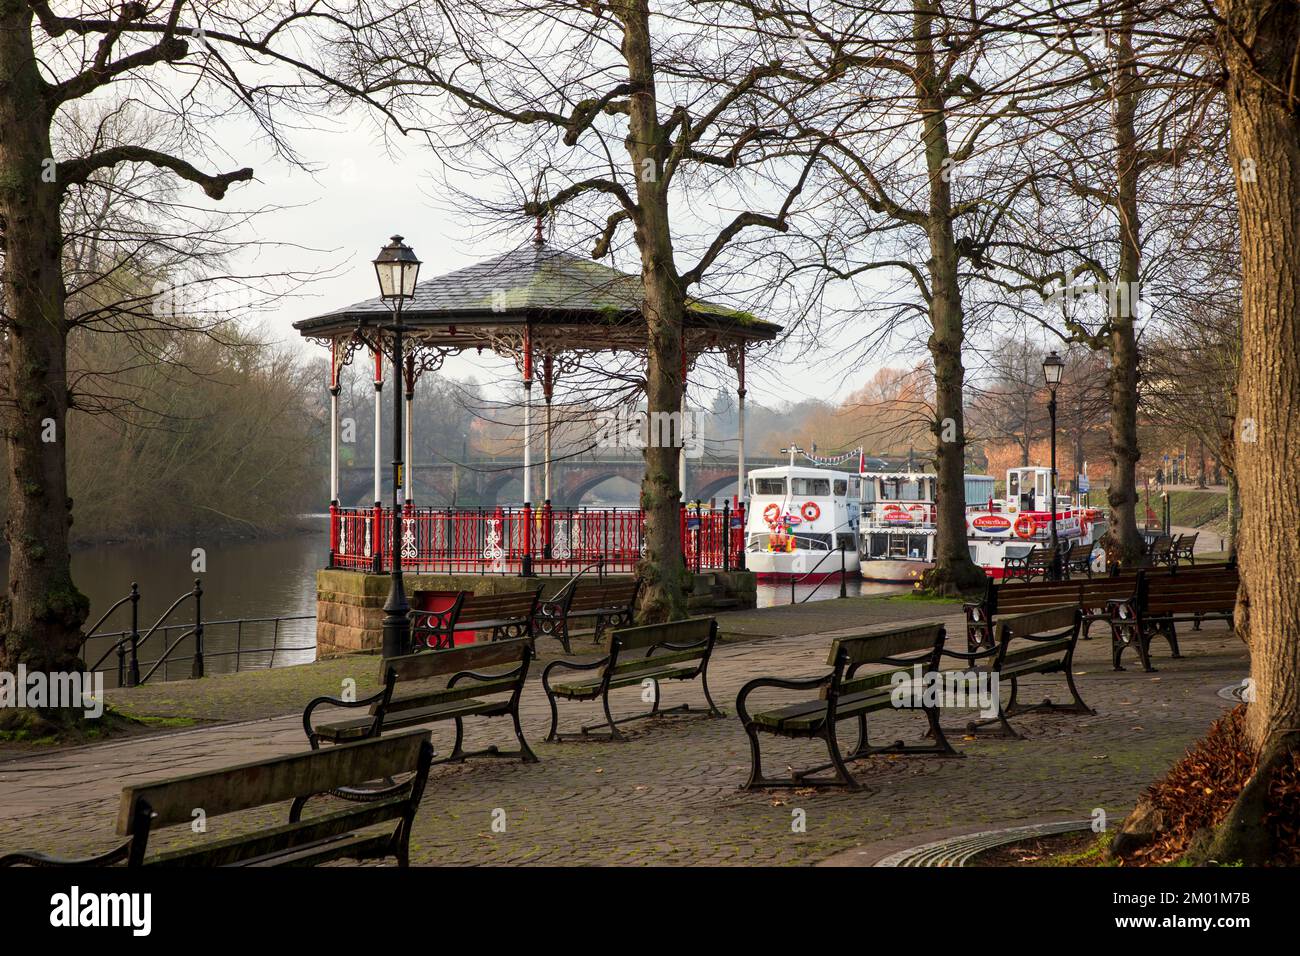 Chester, United Kingdom - December 1st 2022: Built out of yellow sandstone, with cast-iron columns and a slate roof, the Chester bandstand  is situate Stock Photo